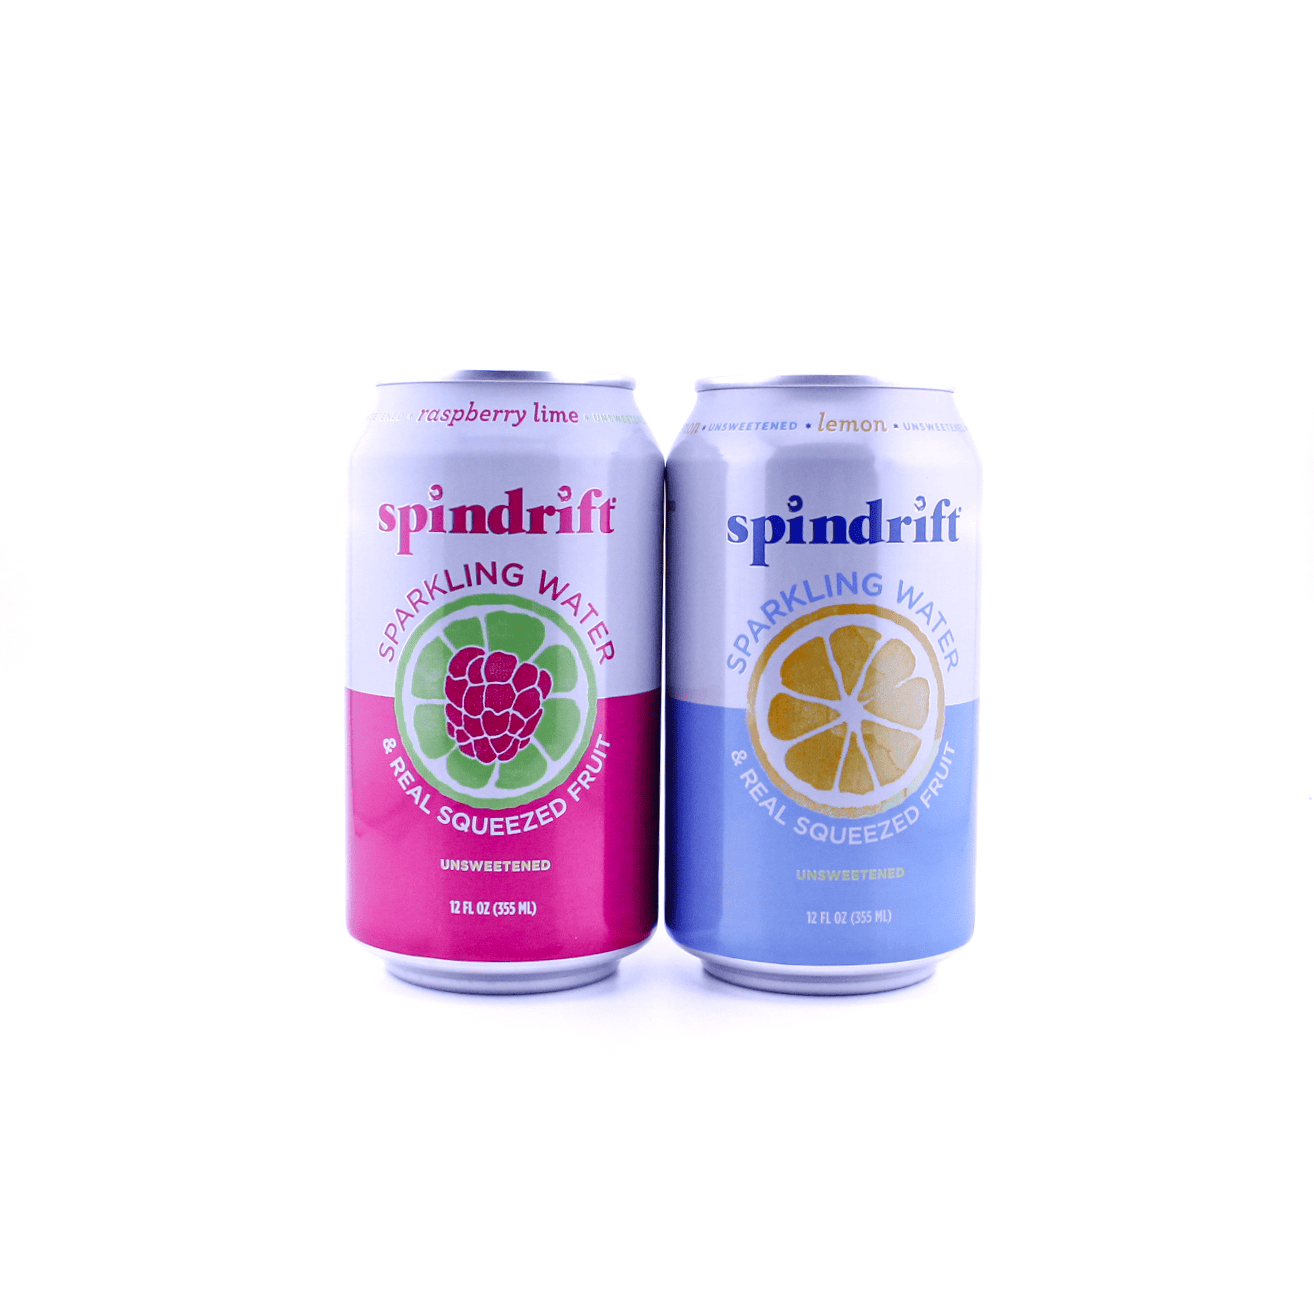 Spindrift Sparkling Water in a can